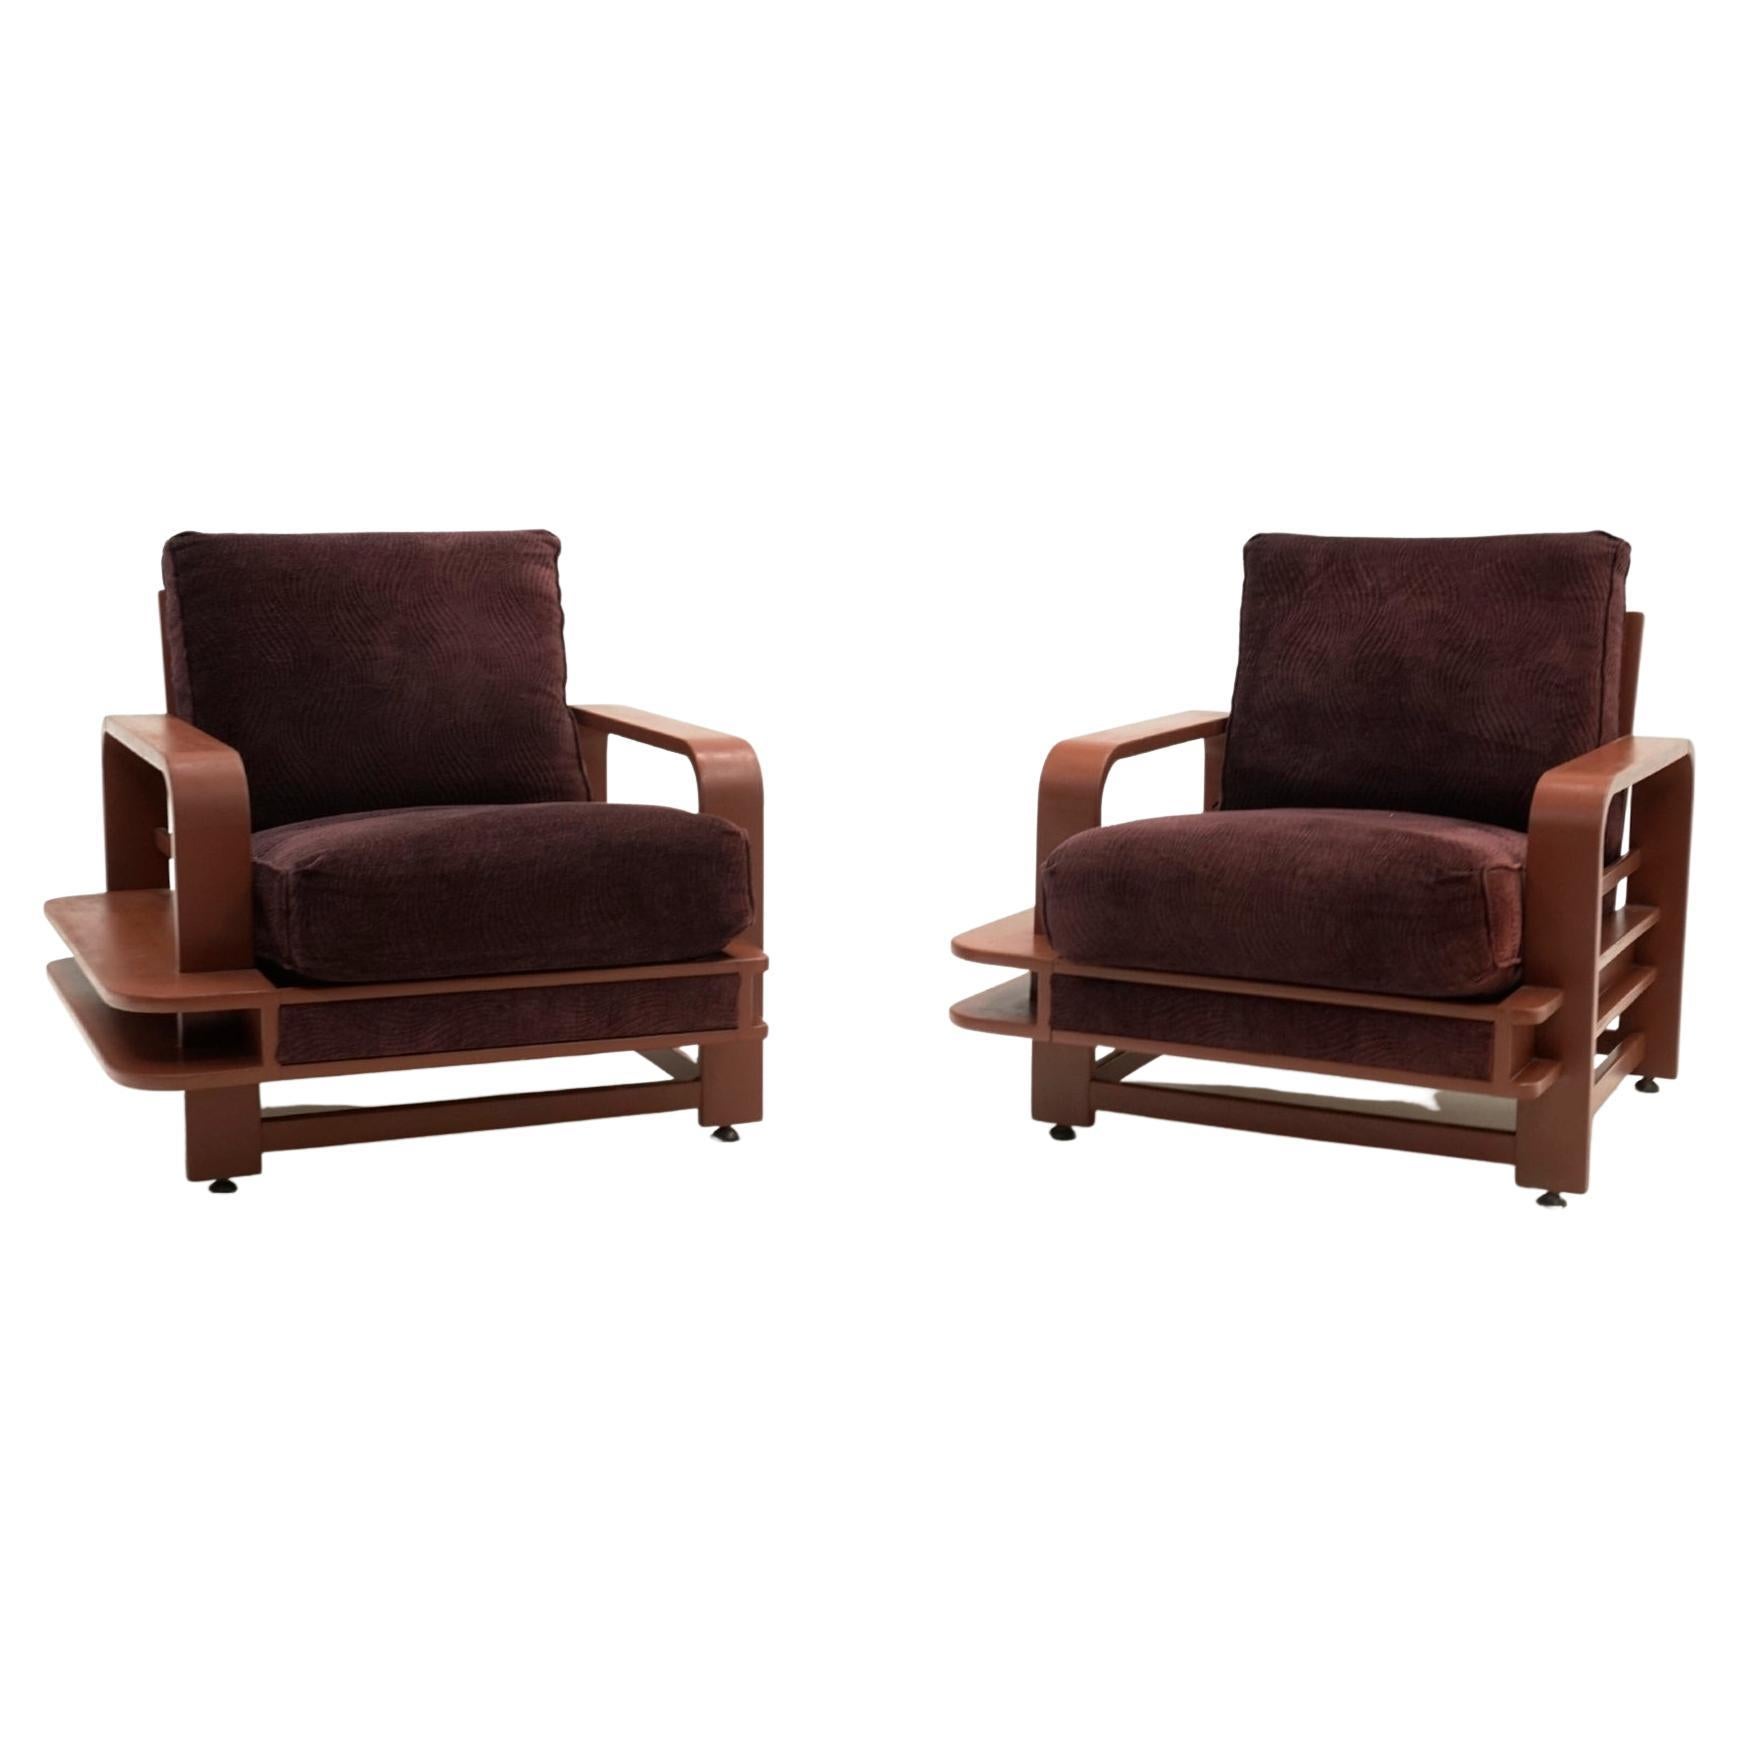 Rare Pair Russel Wright Lounge Chairs for Conant Ball, 1935 For Sale